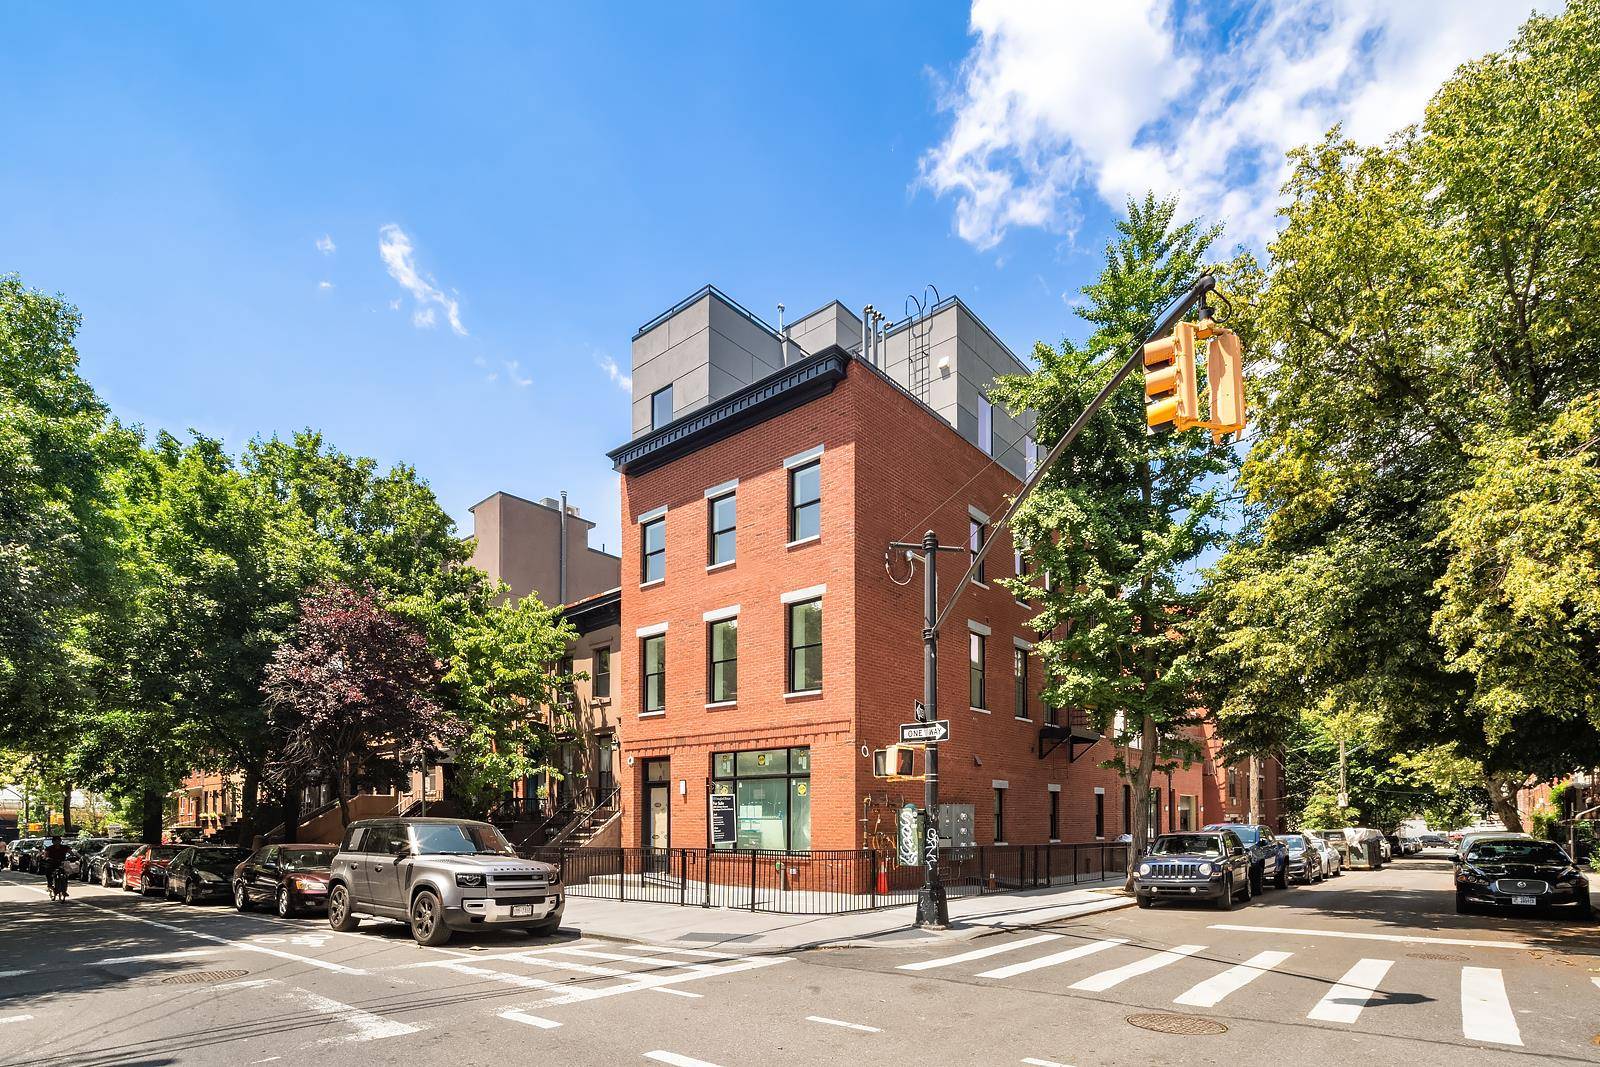 A new boutique condominium in Carroll Gardens, 538 Clinton Street is a coveted 25' wide townhouse that has been reborn as 5 unique residences.